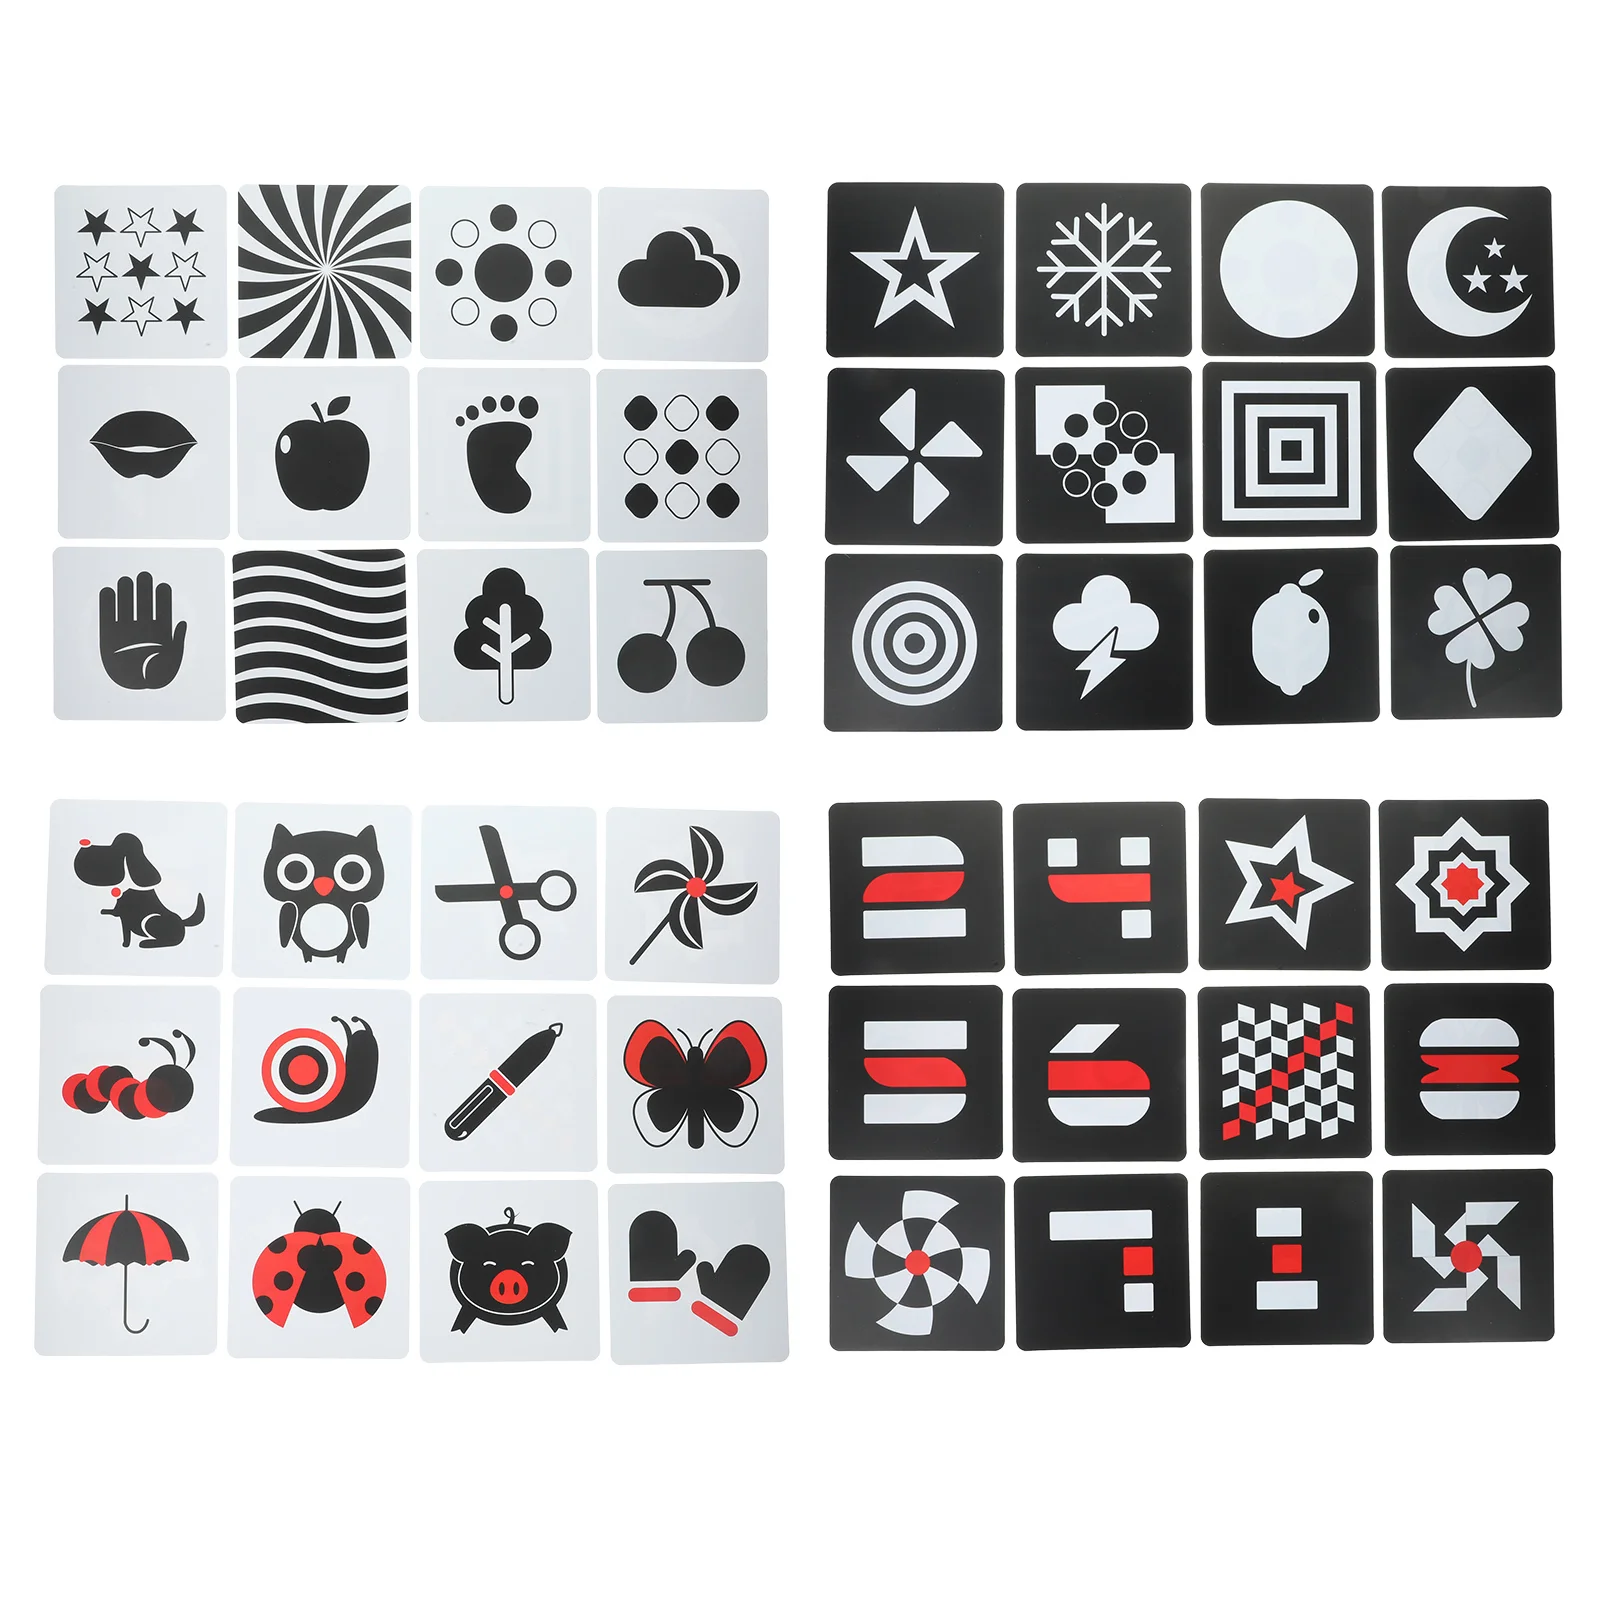 High Contrast Infant Toys Black White Visual Stimulation Cards Kids Activity Cards sunuo p40 pro smart visual ear cleaner 5mp hd camera 6 axis gyroscope hall style switch waterproof wifi connection black